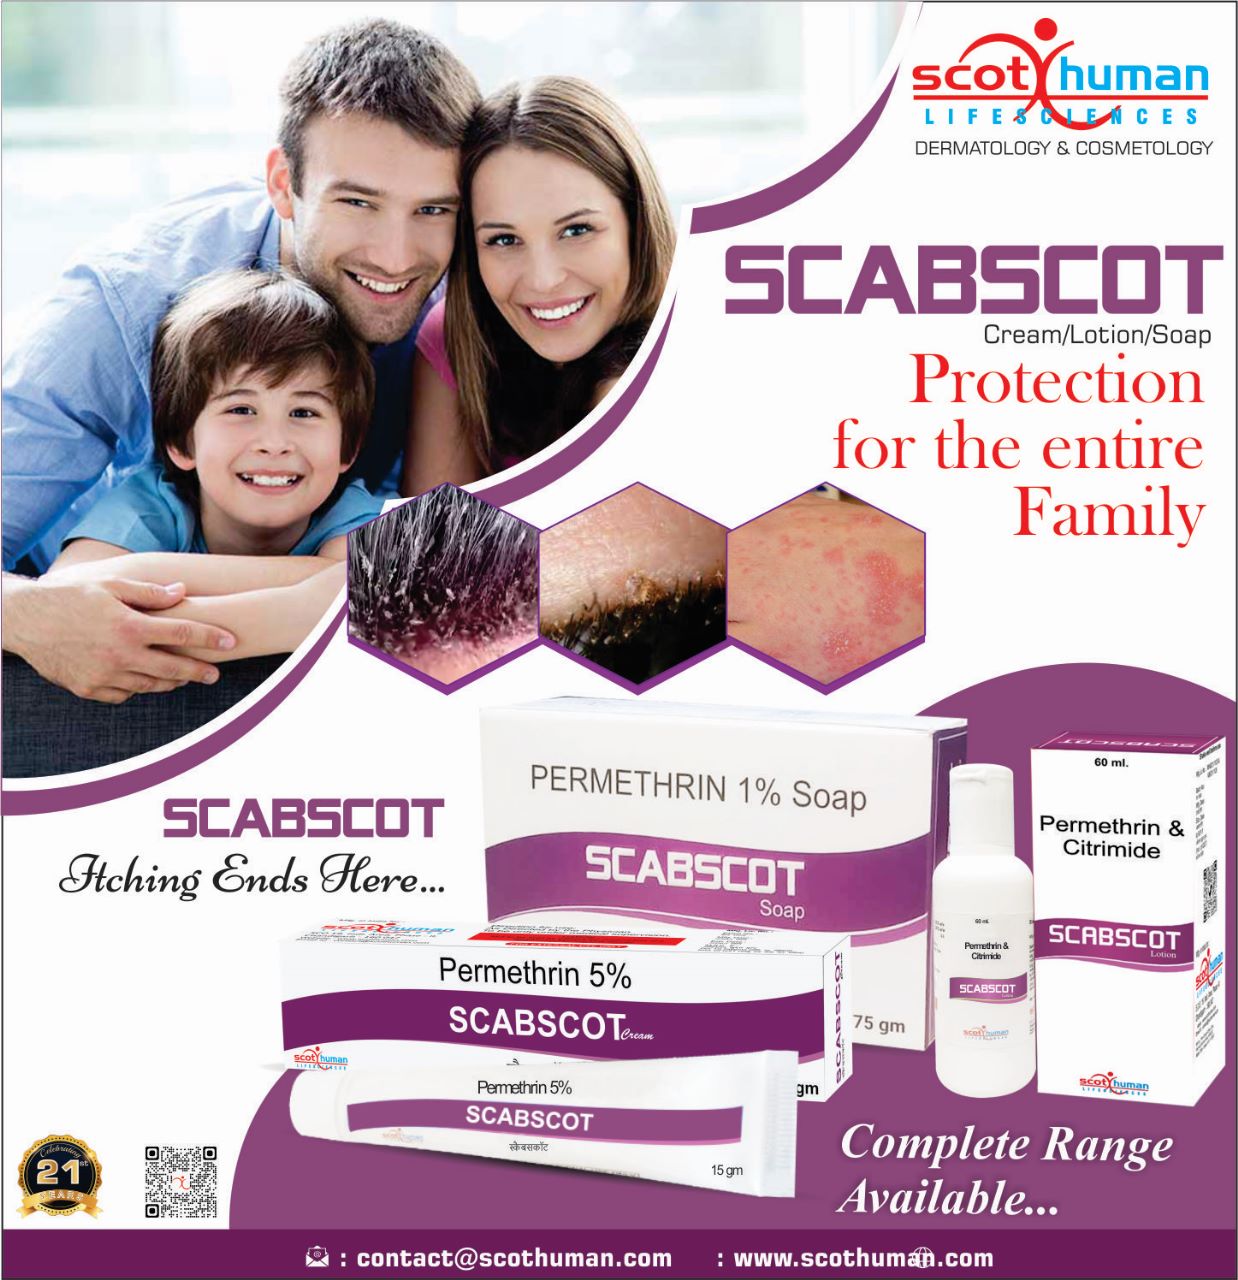 Product Name: Scabscot, Compositions of Scabscot are Permethrin 5% - Pharma Drugs and Chemicals